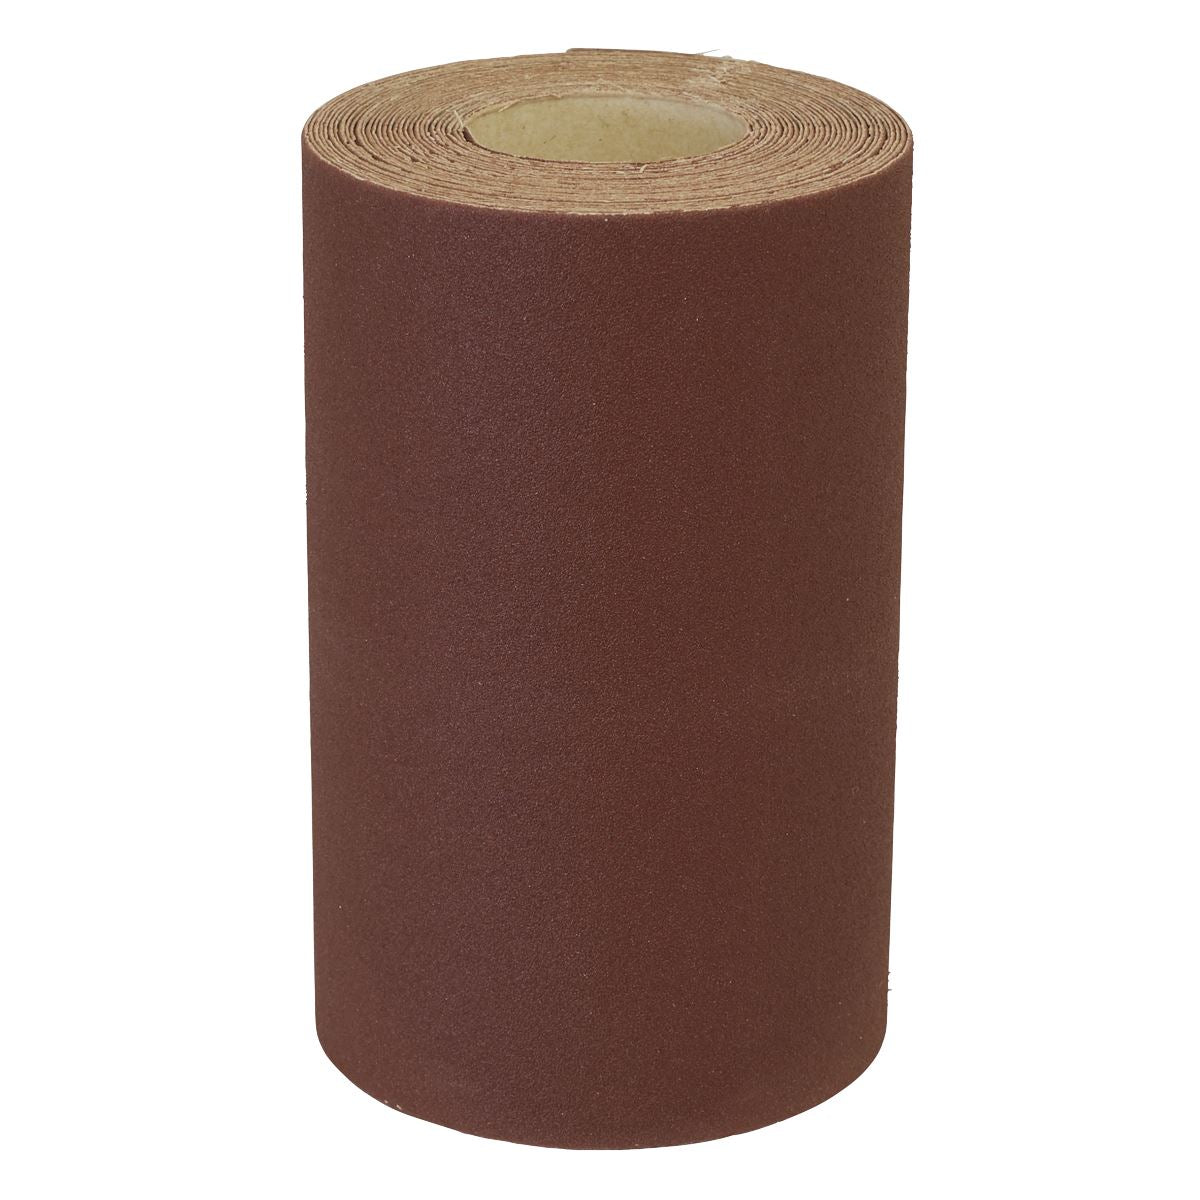 Worksafe by Sealey Production Sanding Roll 115mm x 5m - Extra Fine 180Grit